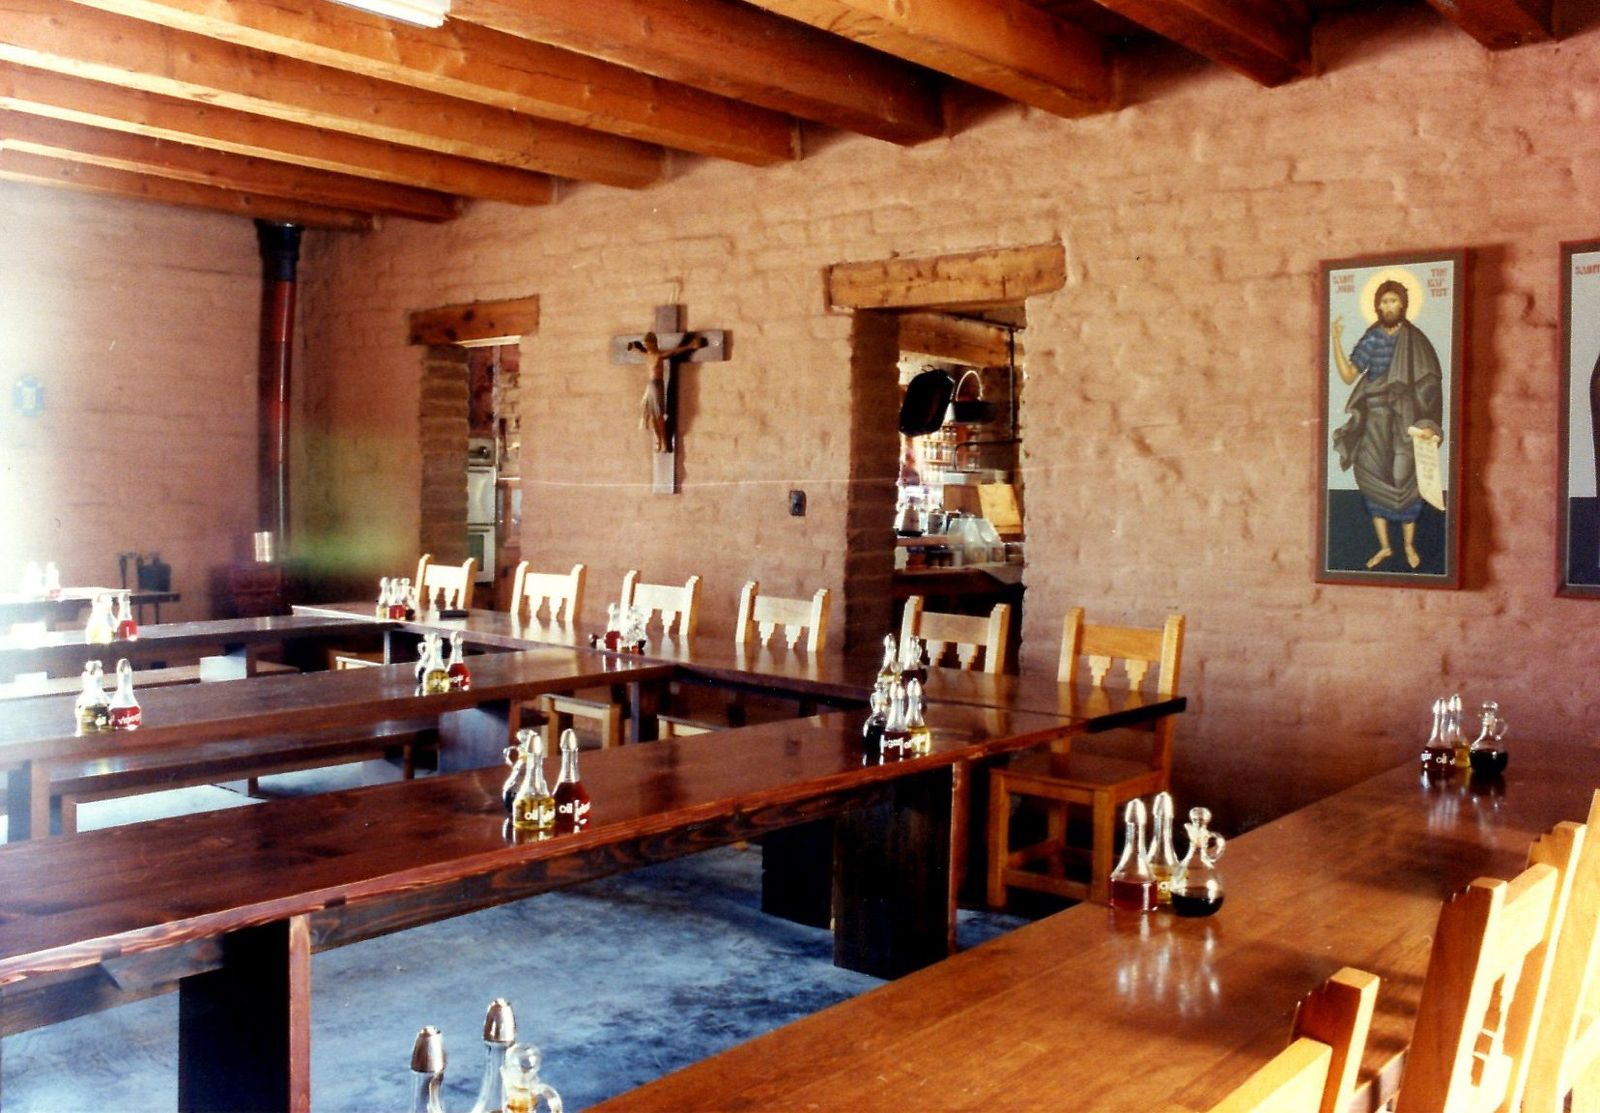 The old refectory, now converted into the Chapter Room